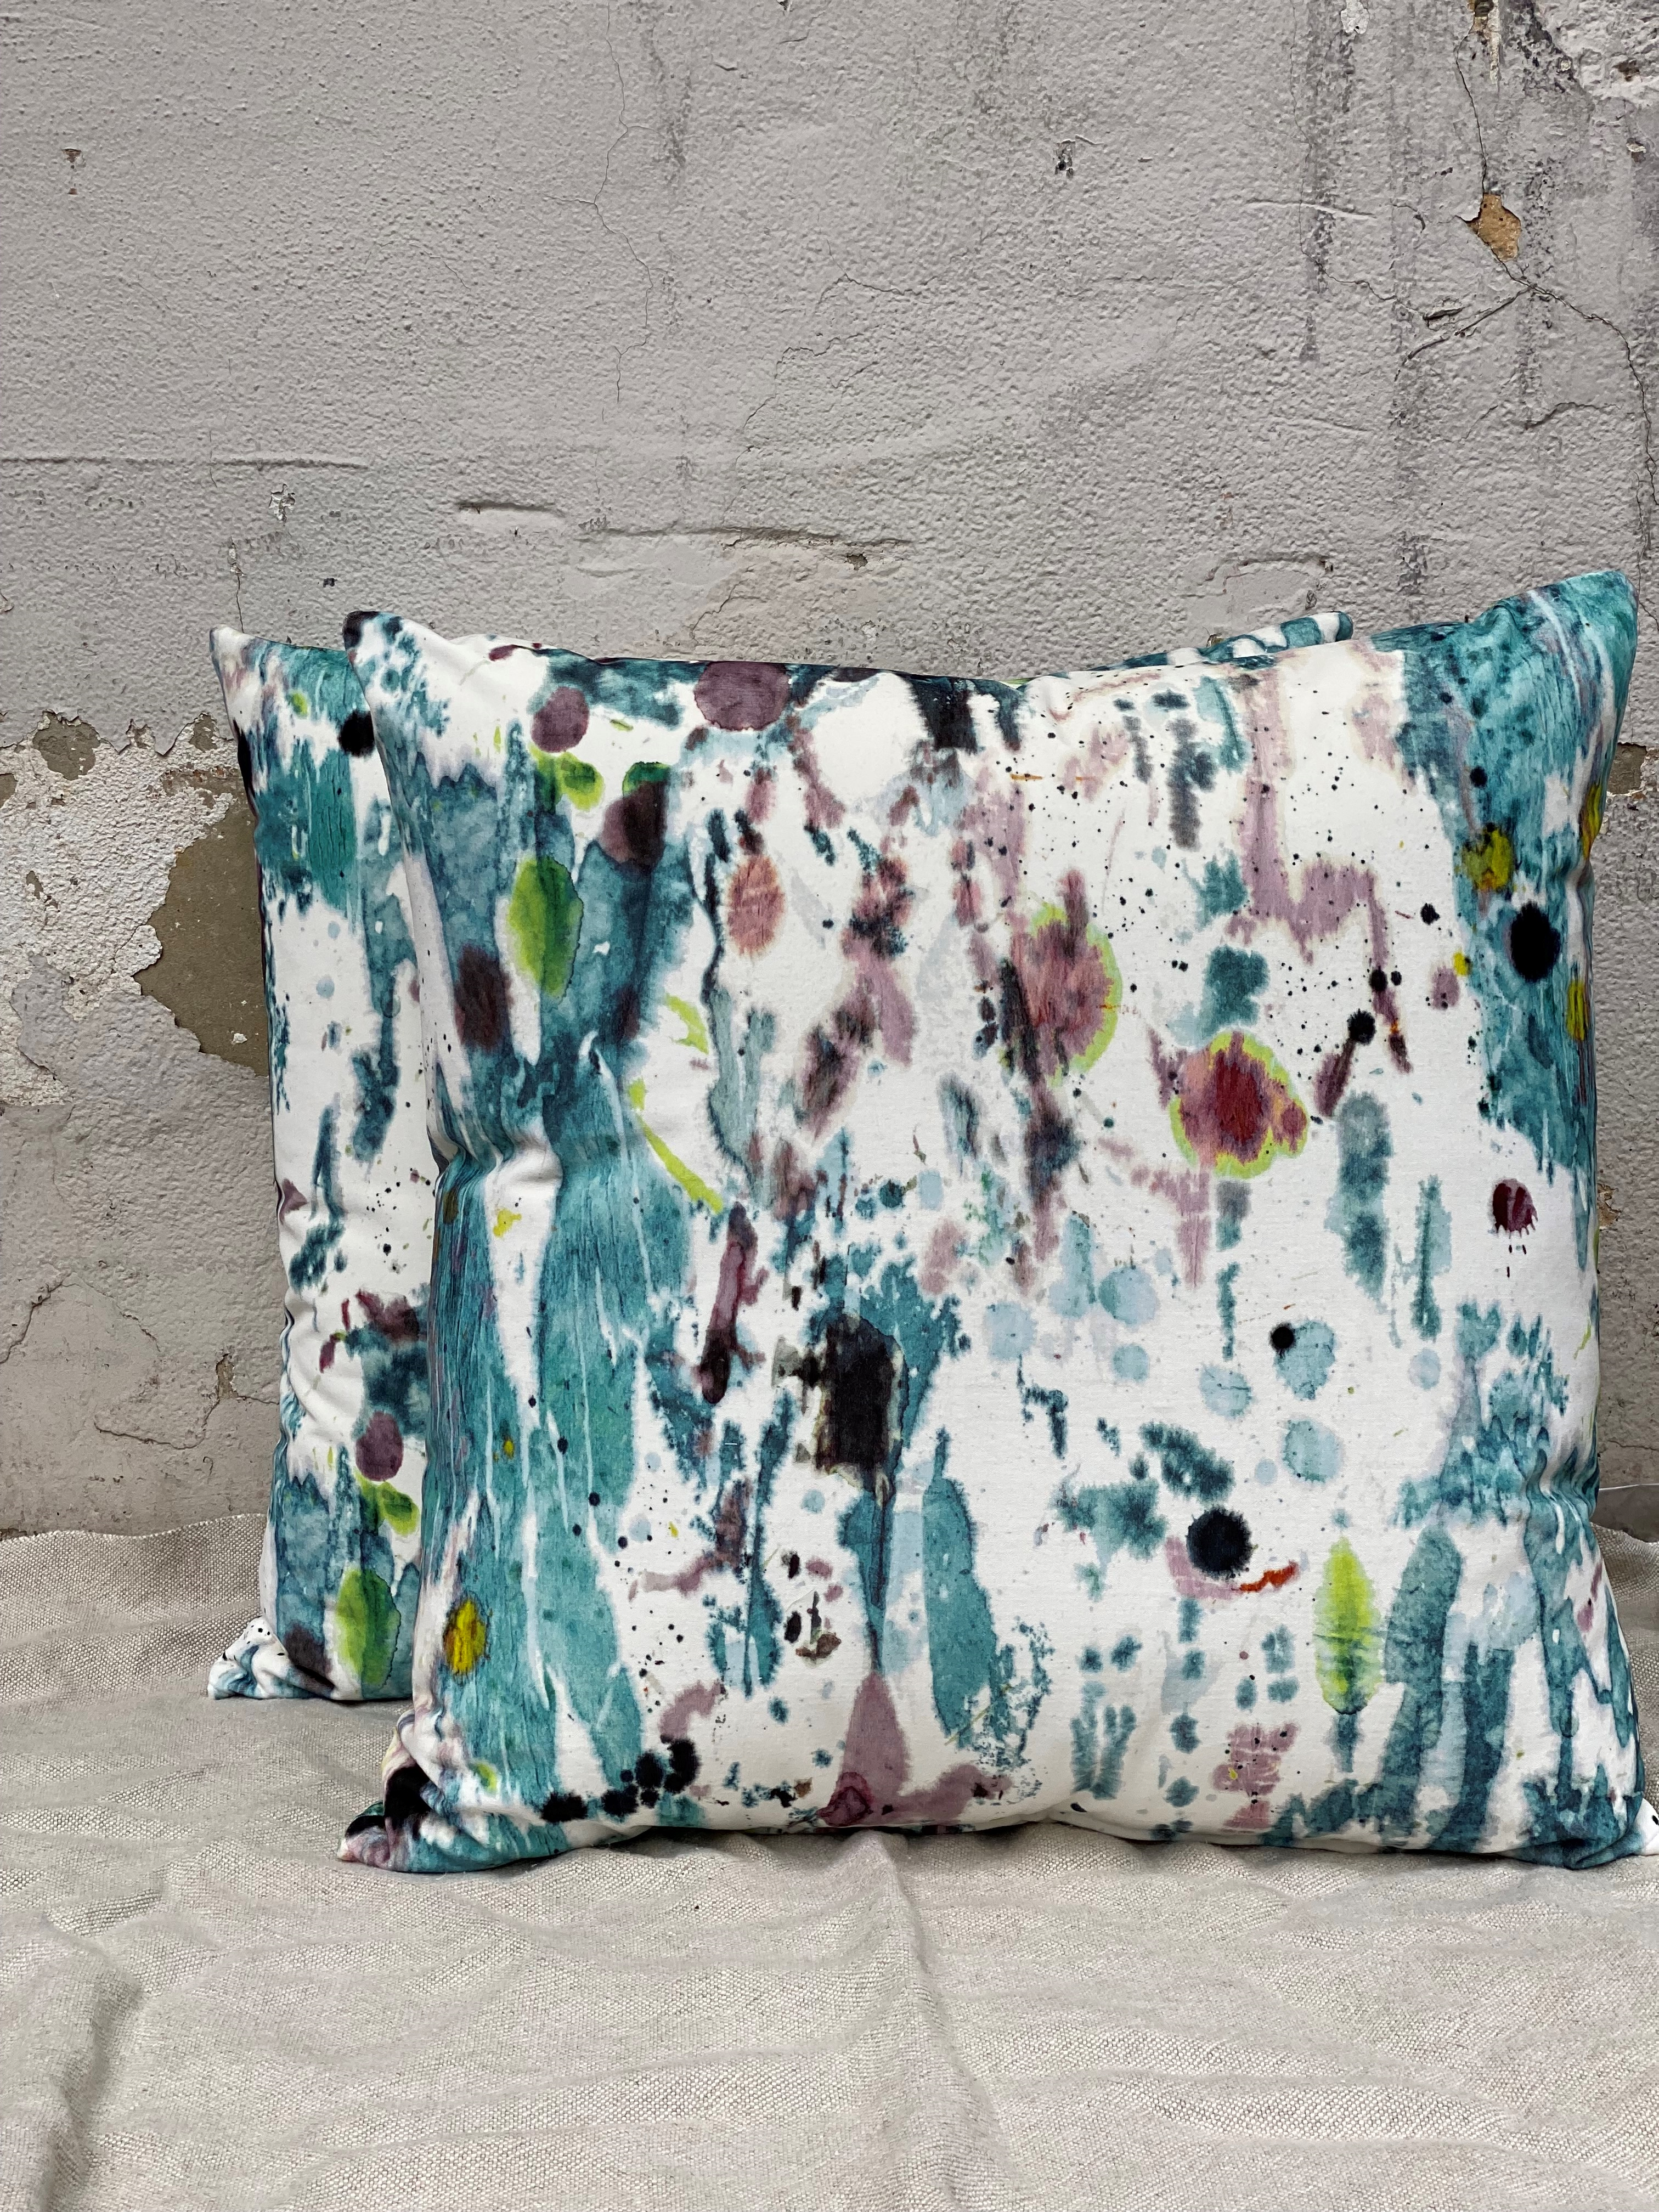 Watercolored Pillows